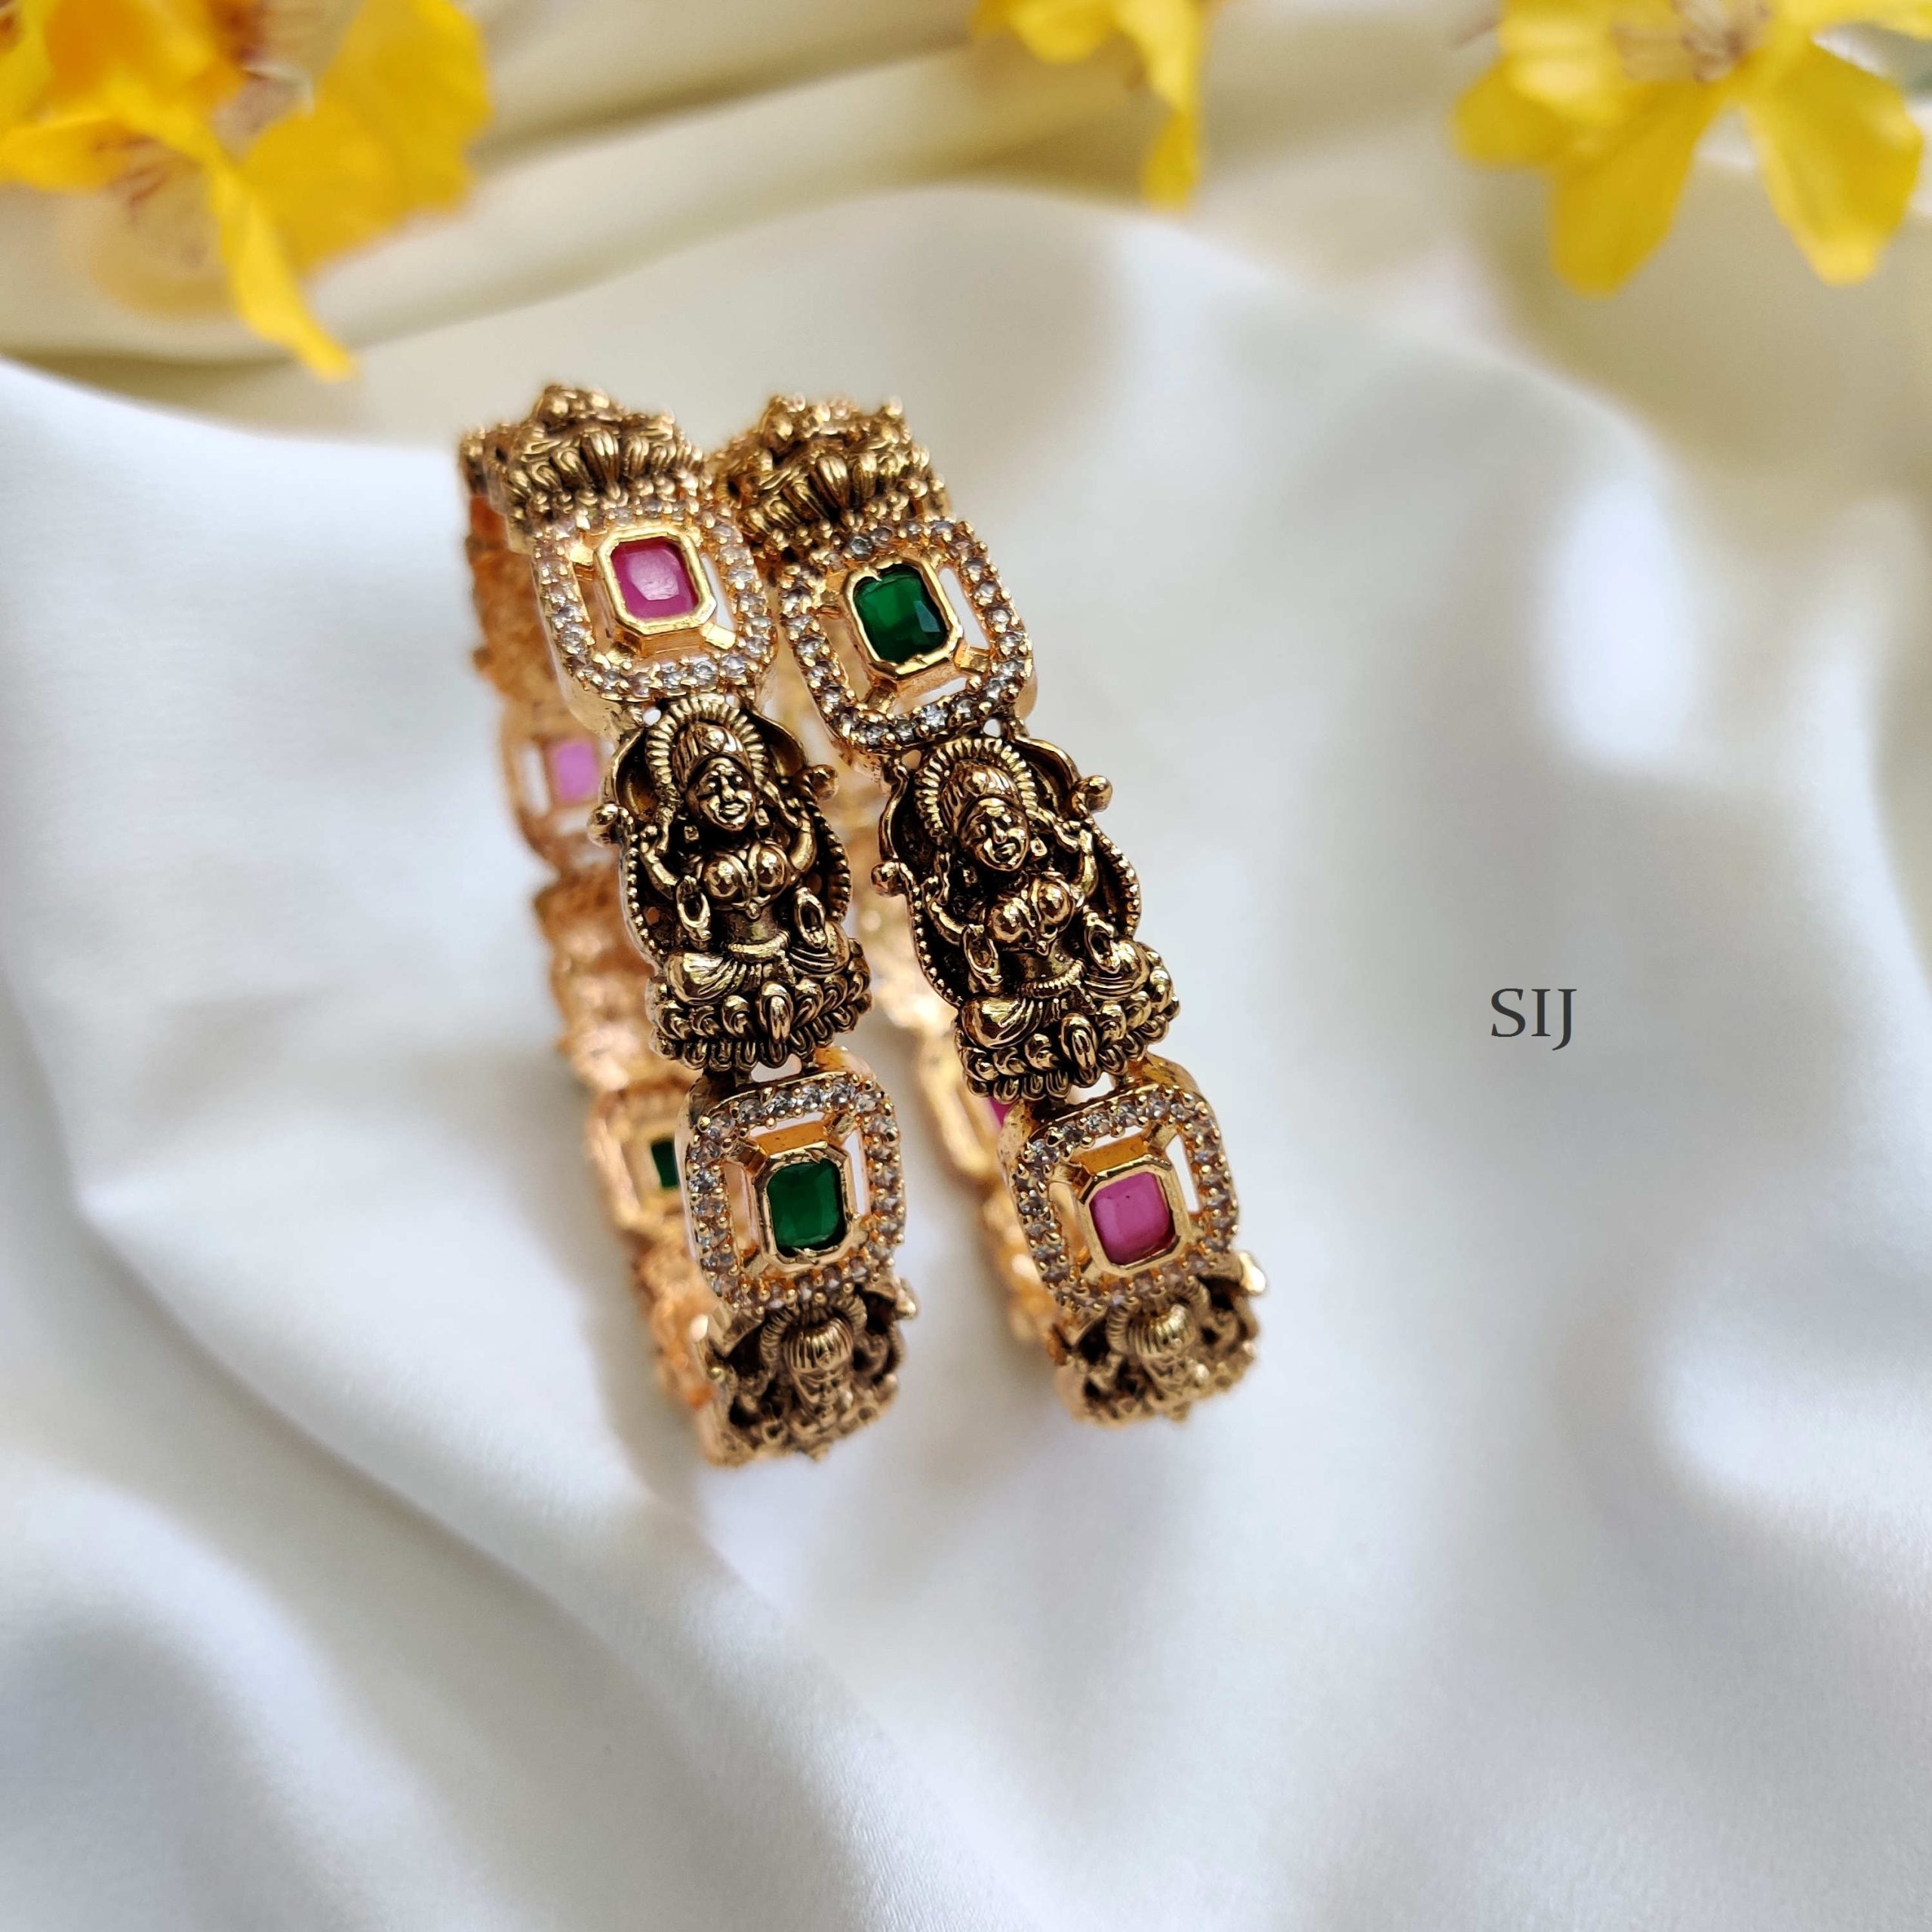 Vintage Touch And Minutely Crafted Lakshmi Design Bangles